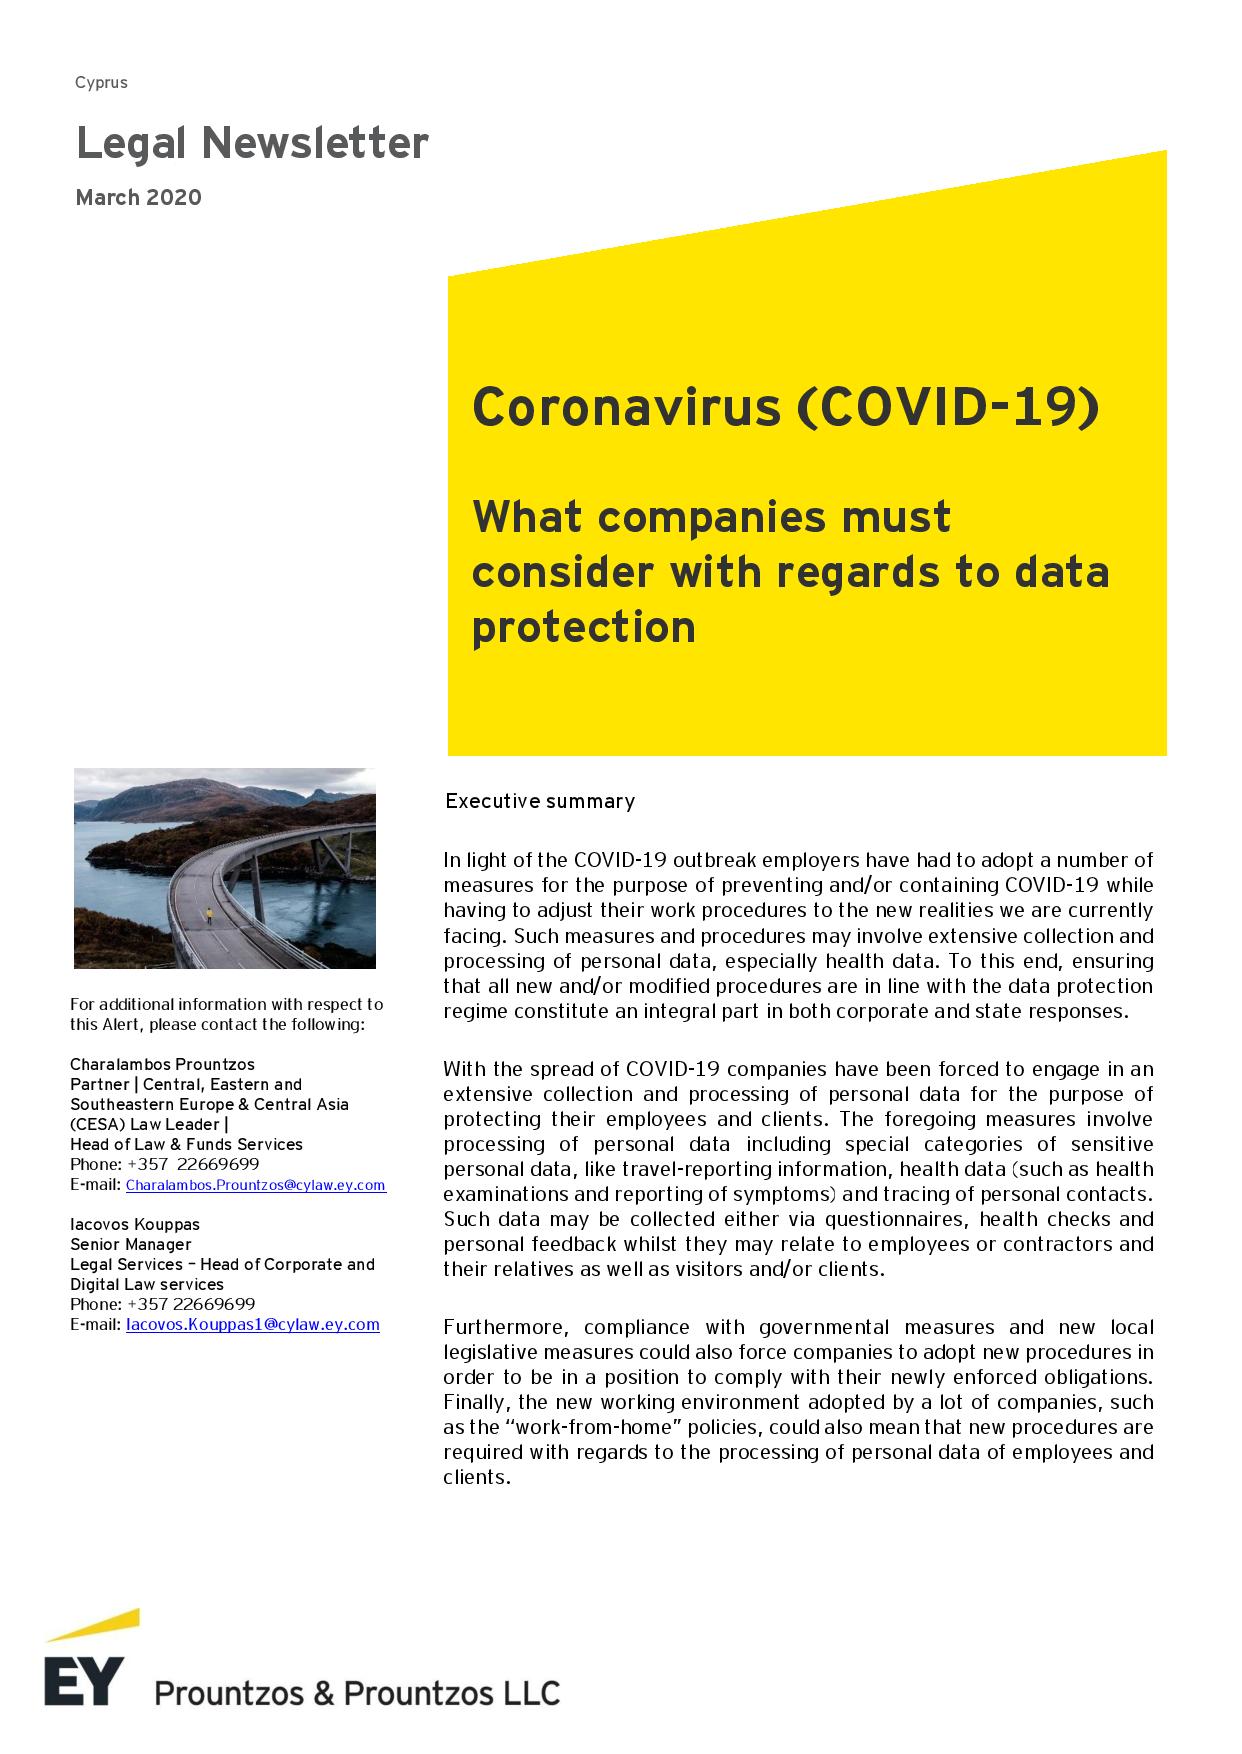 EY Cyprus: Coronavirus (COVID-19) What companies must consider with regards to data protection